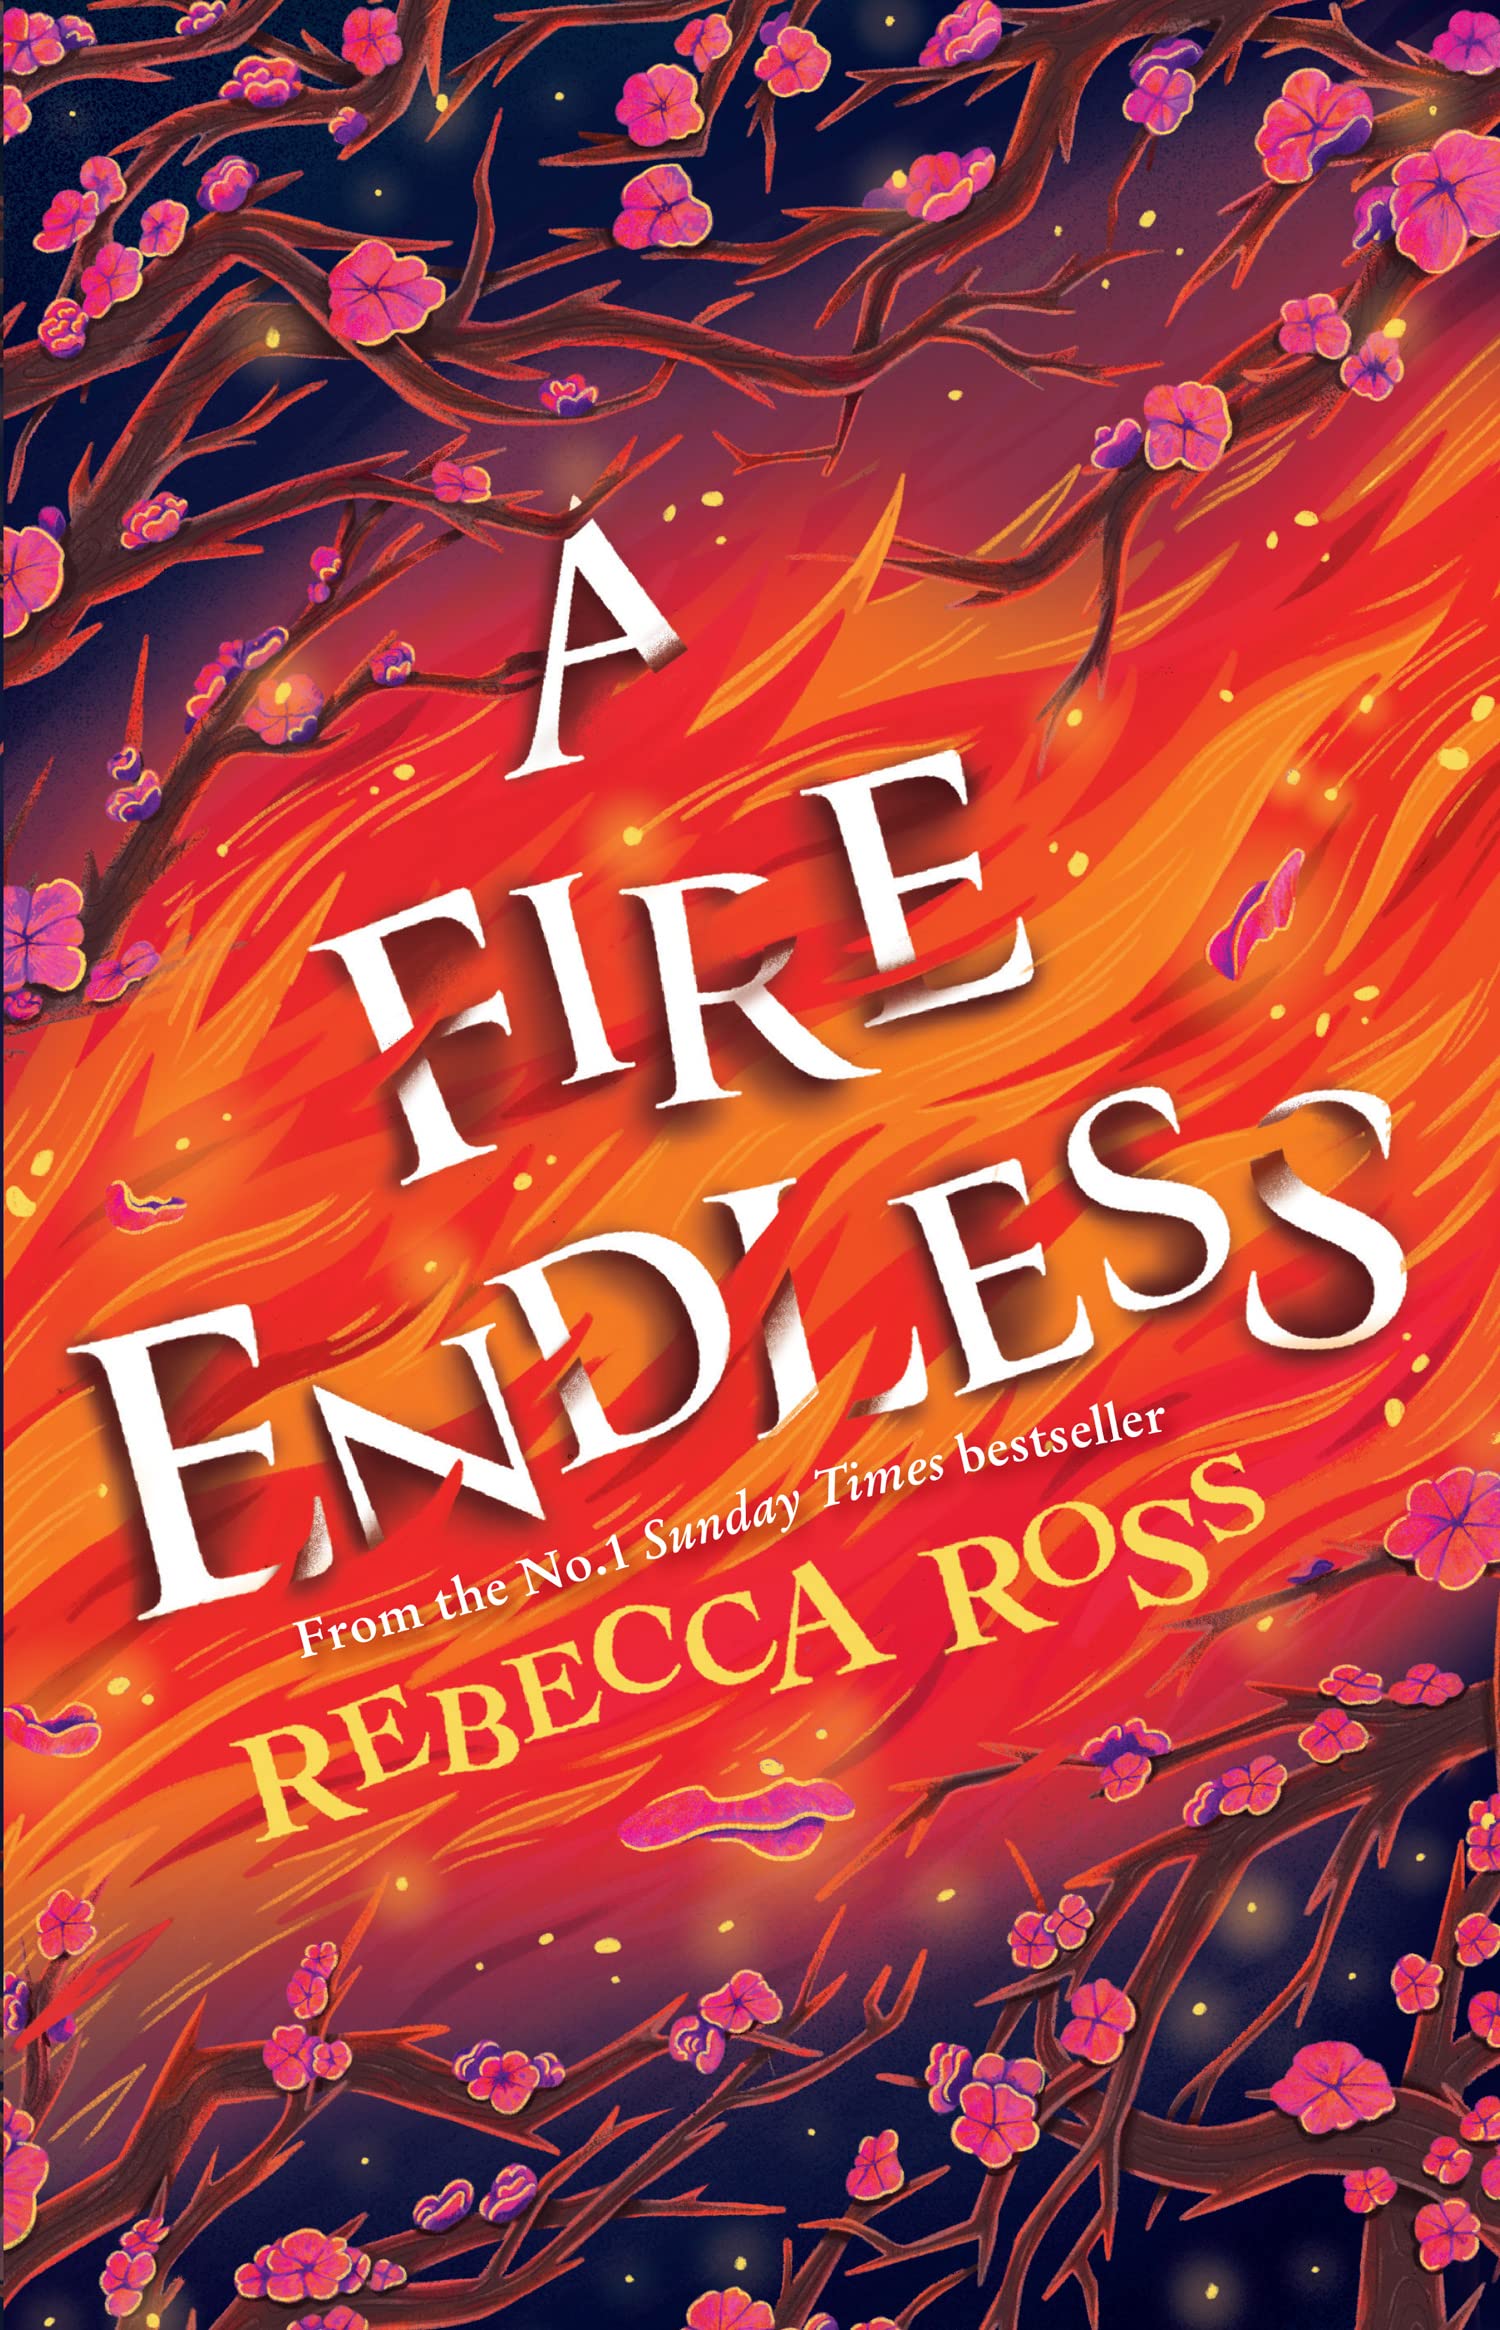 A Fire Endless (Elements of Cadence #2) Free ePub Download